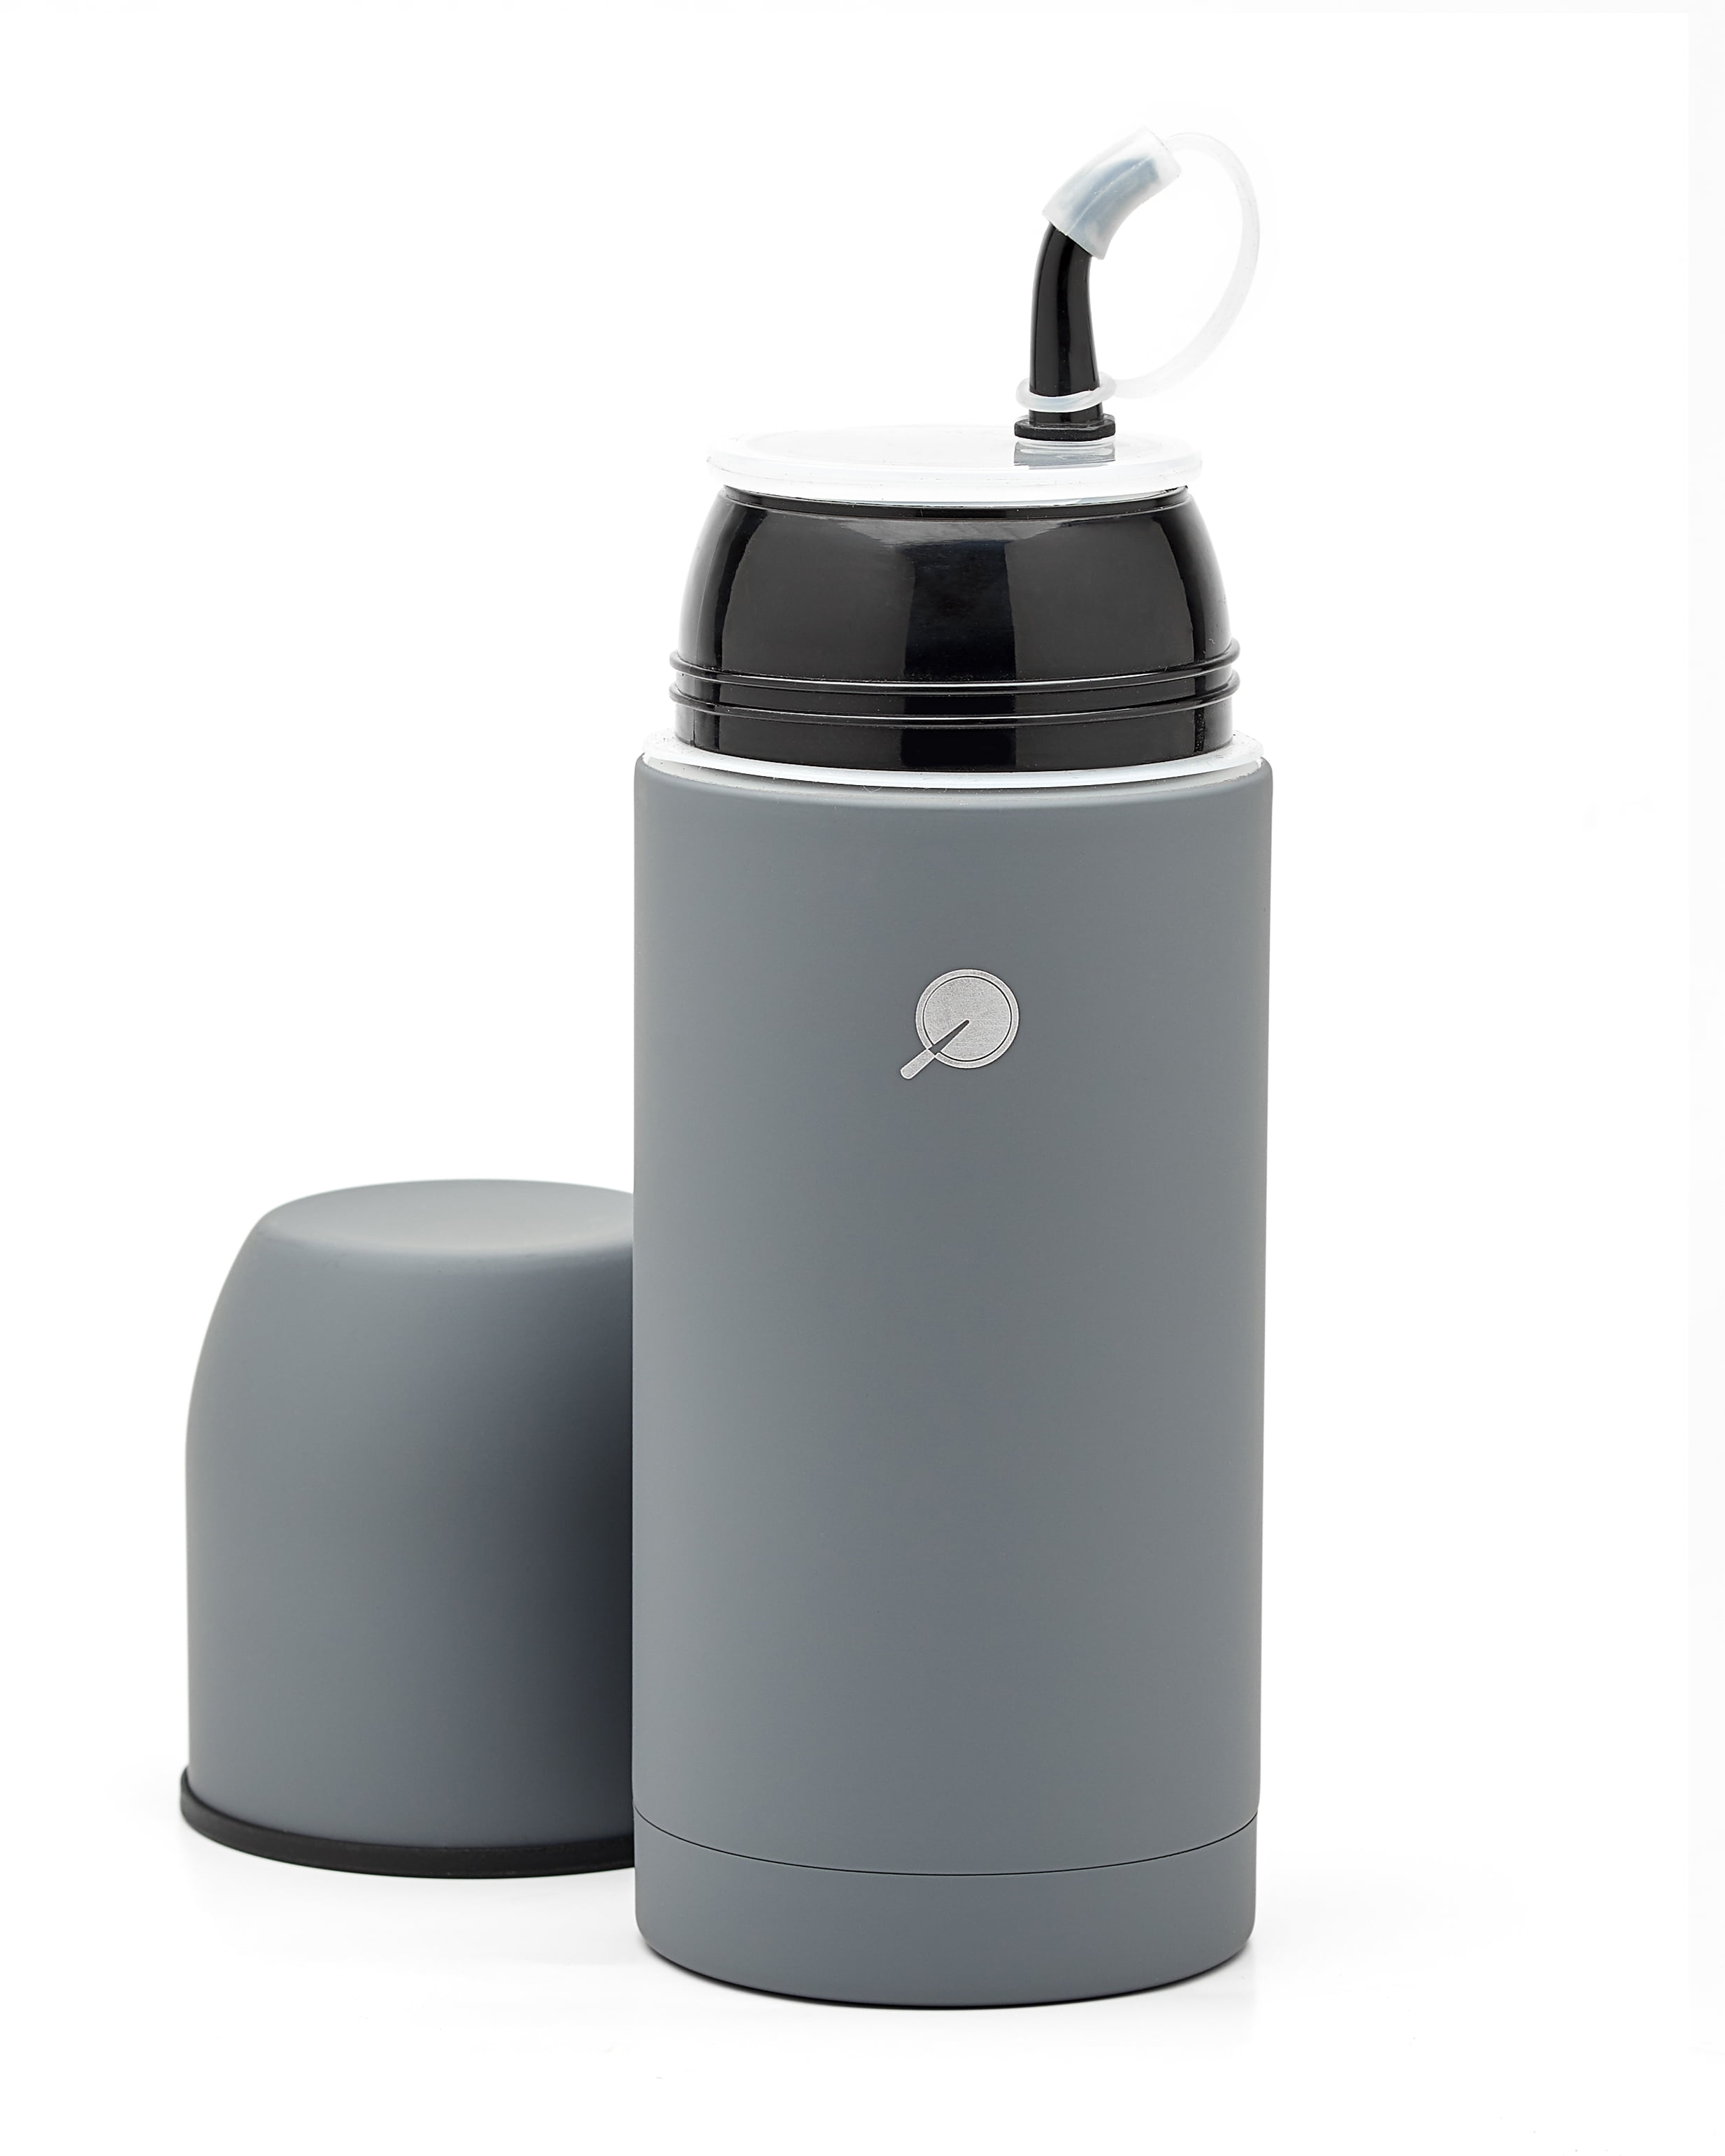  BALIBETOV Camping Thermos for Mate - Vacuum Insulated With  Double Stainless Steel Wall- A Mate Thermos Specially Designed as Mate  Argentino Kit that includes Bombilla and Mate Cup (Green): Home 